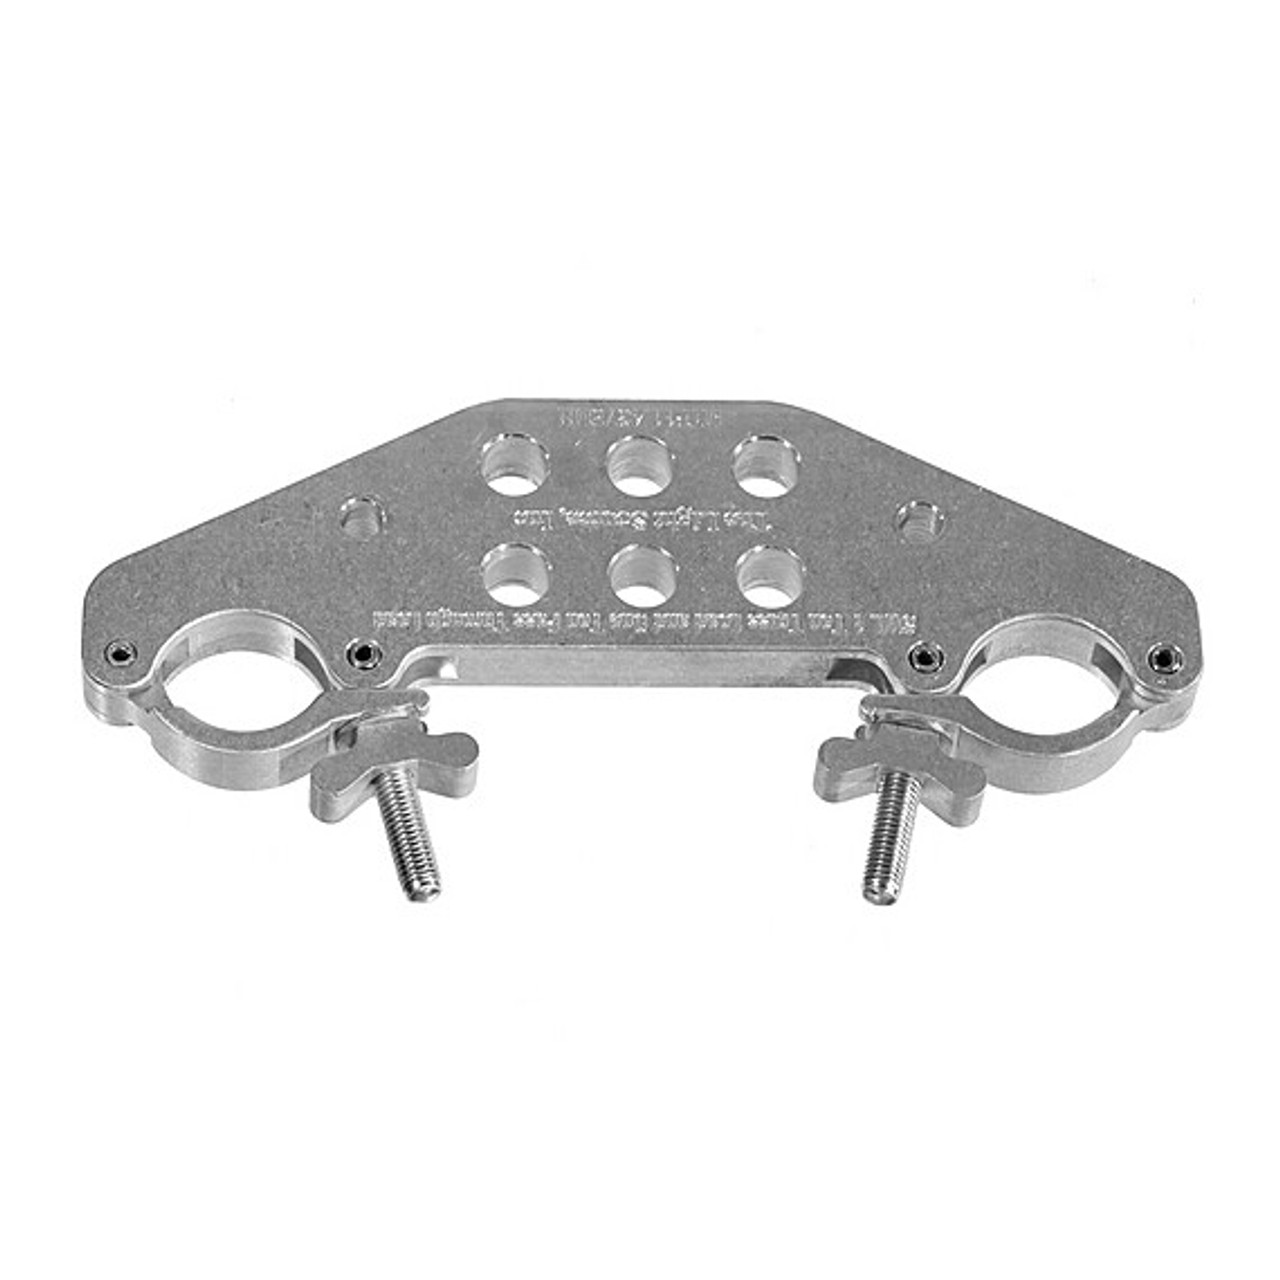 The Light Source MTP11.4375MH GLOBAL Multi-Hole For 11.4375" Truss Mill Finish